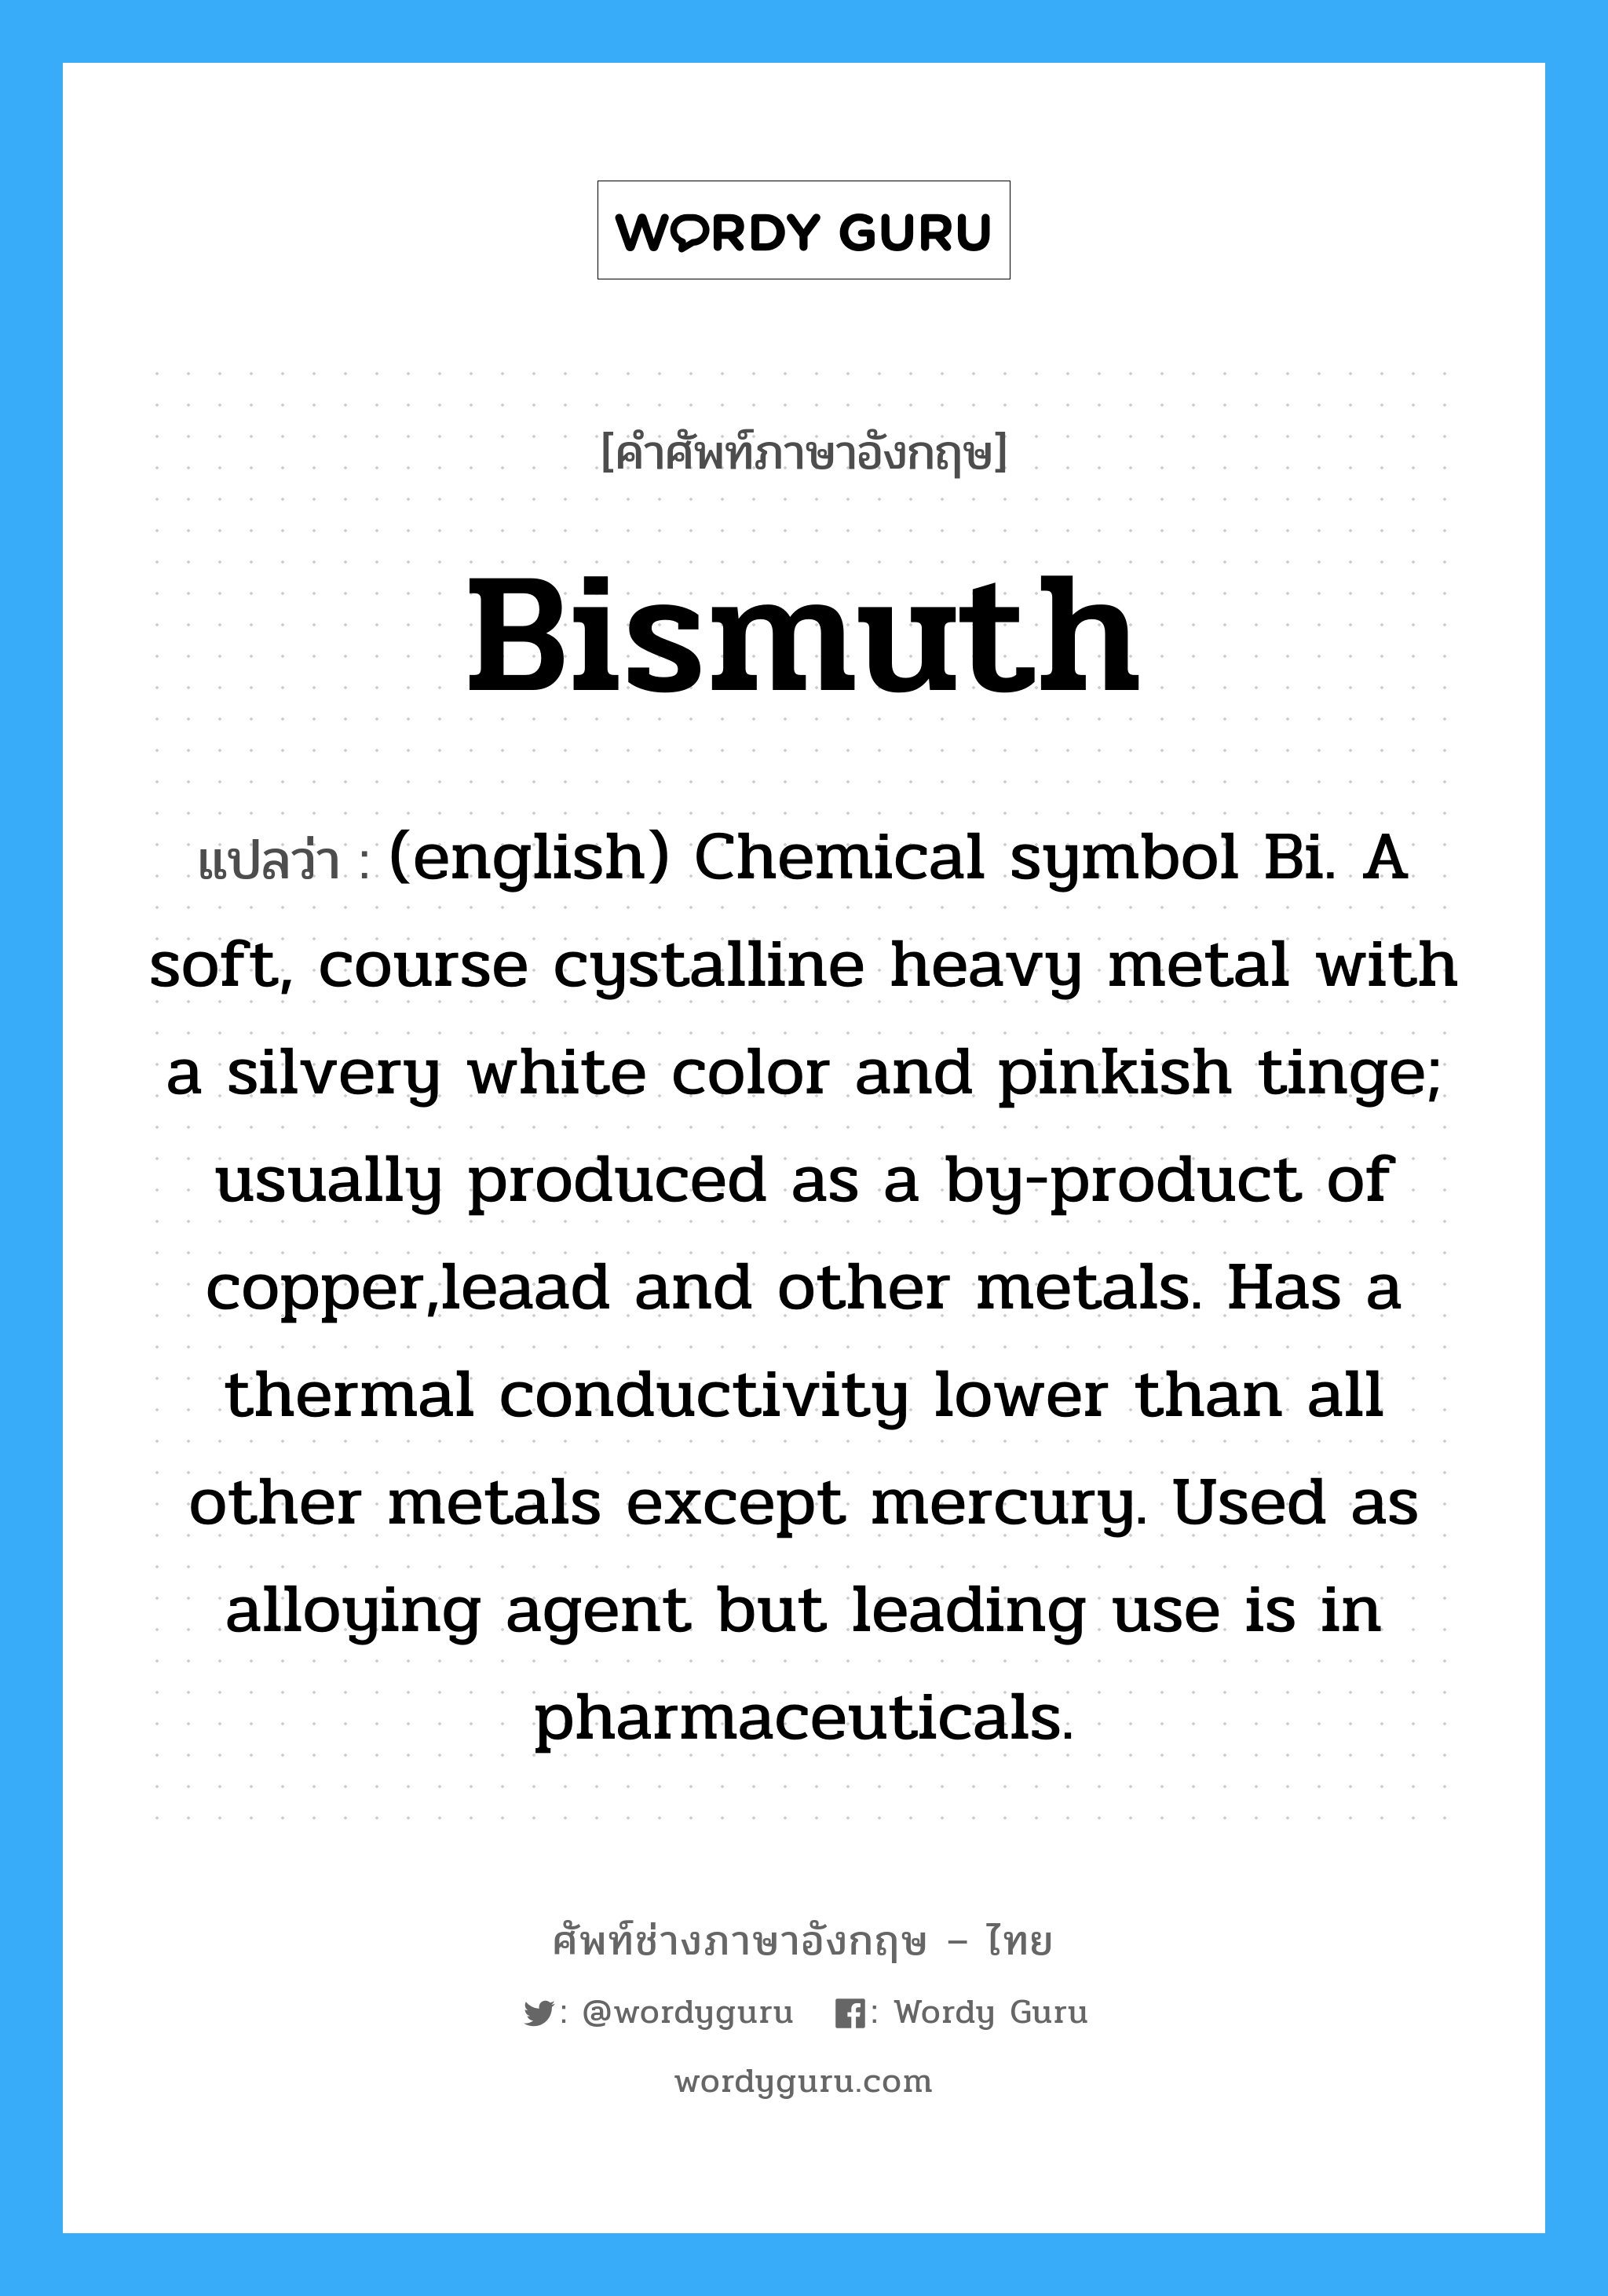 Bismuth แปลว่า?, คำศัพท์ช่างภาษาอังกฤษ - ไทย Bismuth คำศัพท์ภาษาอังกฤษ Bismuth แปลว่า (english) Chemical symbol Bi. A soft, course cystalline heavy metal with a silvery white color and pinkish tinge; usually produced as a by-product of copper,leaad and other metals. Has a thermal conductivity lower than all other metals except mercury. Used as alloying agent but leading use is in pharmaceuticals.